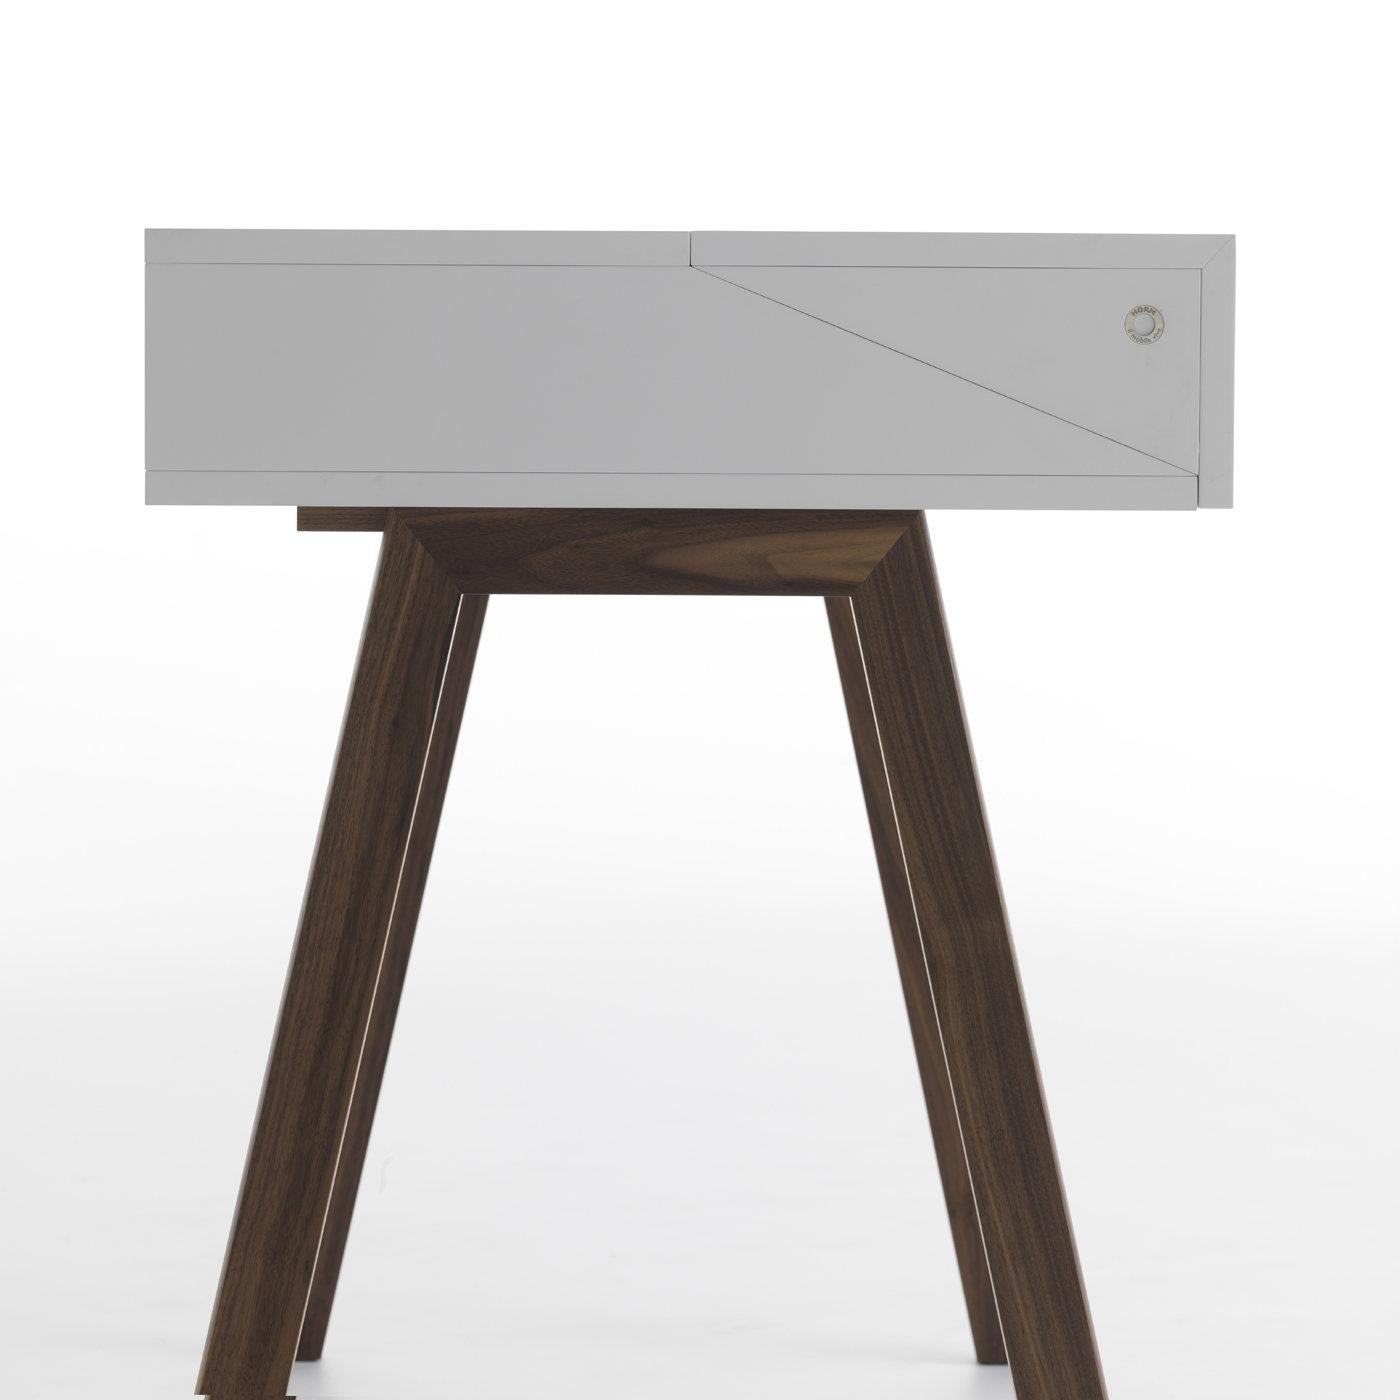 This modern piece of functional decor designed by Esa Vesman boasts a clean, elegant allure. Versatile and innovative, it stands on Canaletto walnut wood with a white-lacquer finish and features a hutch in MDF that flips open revealing a functional